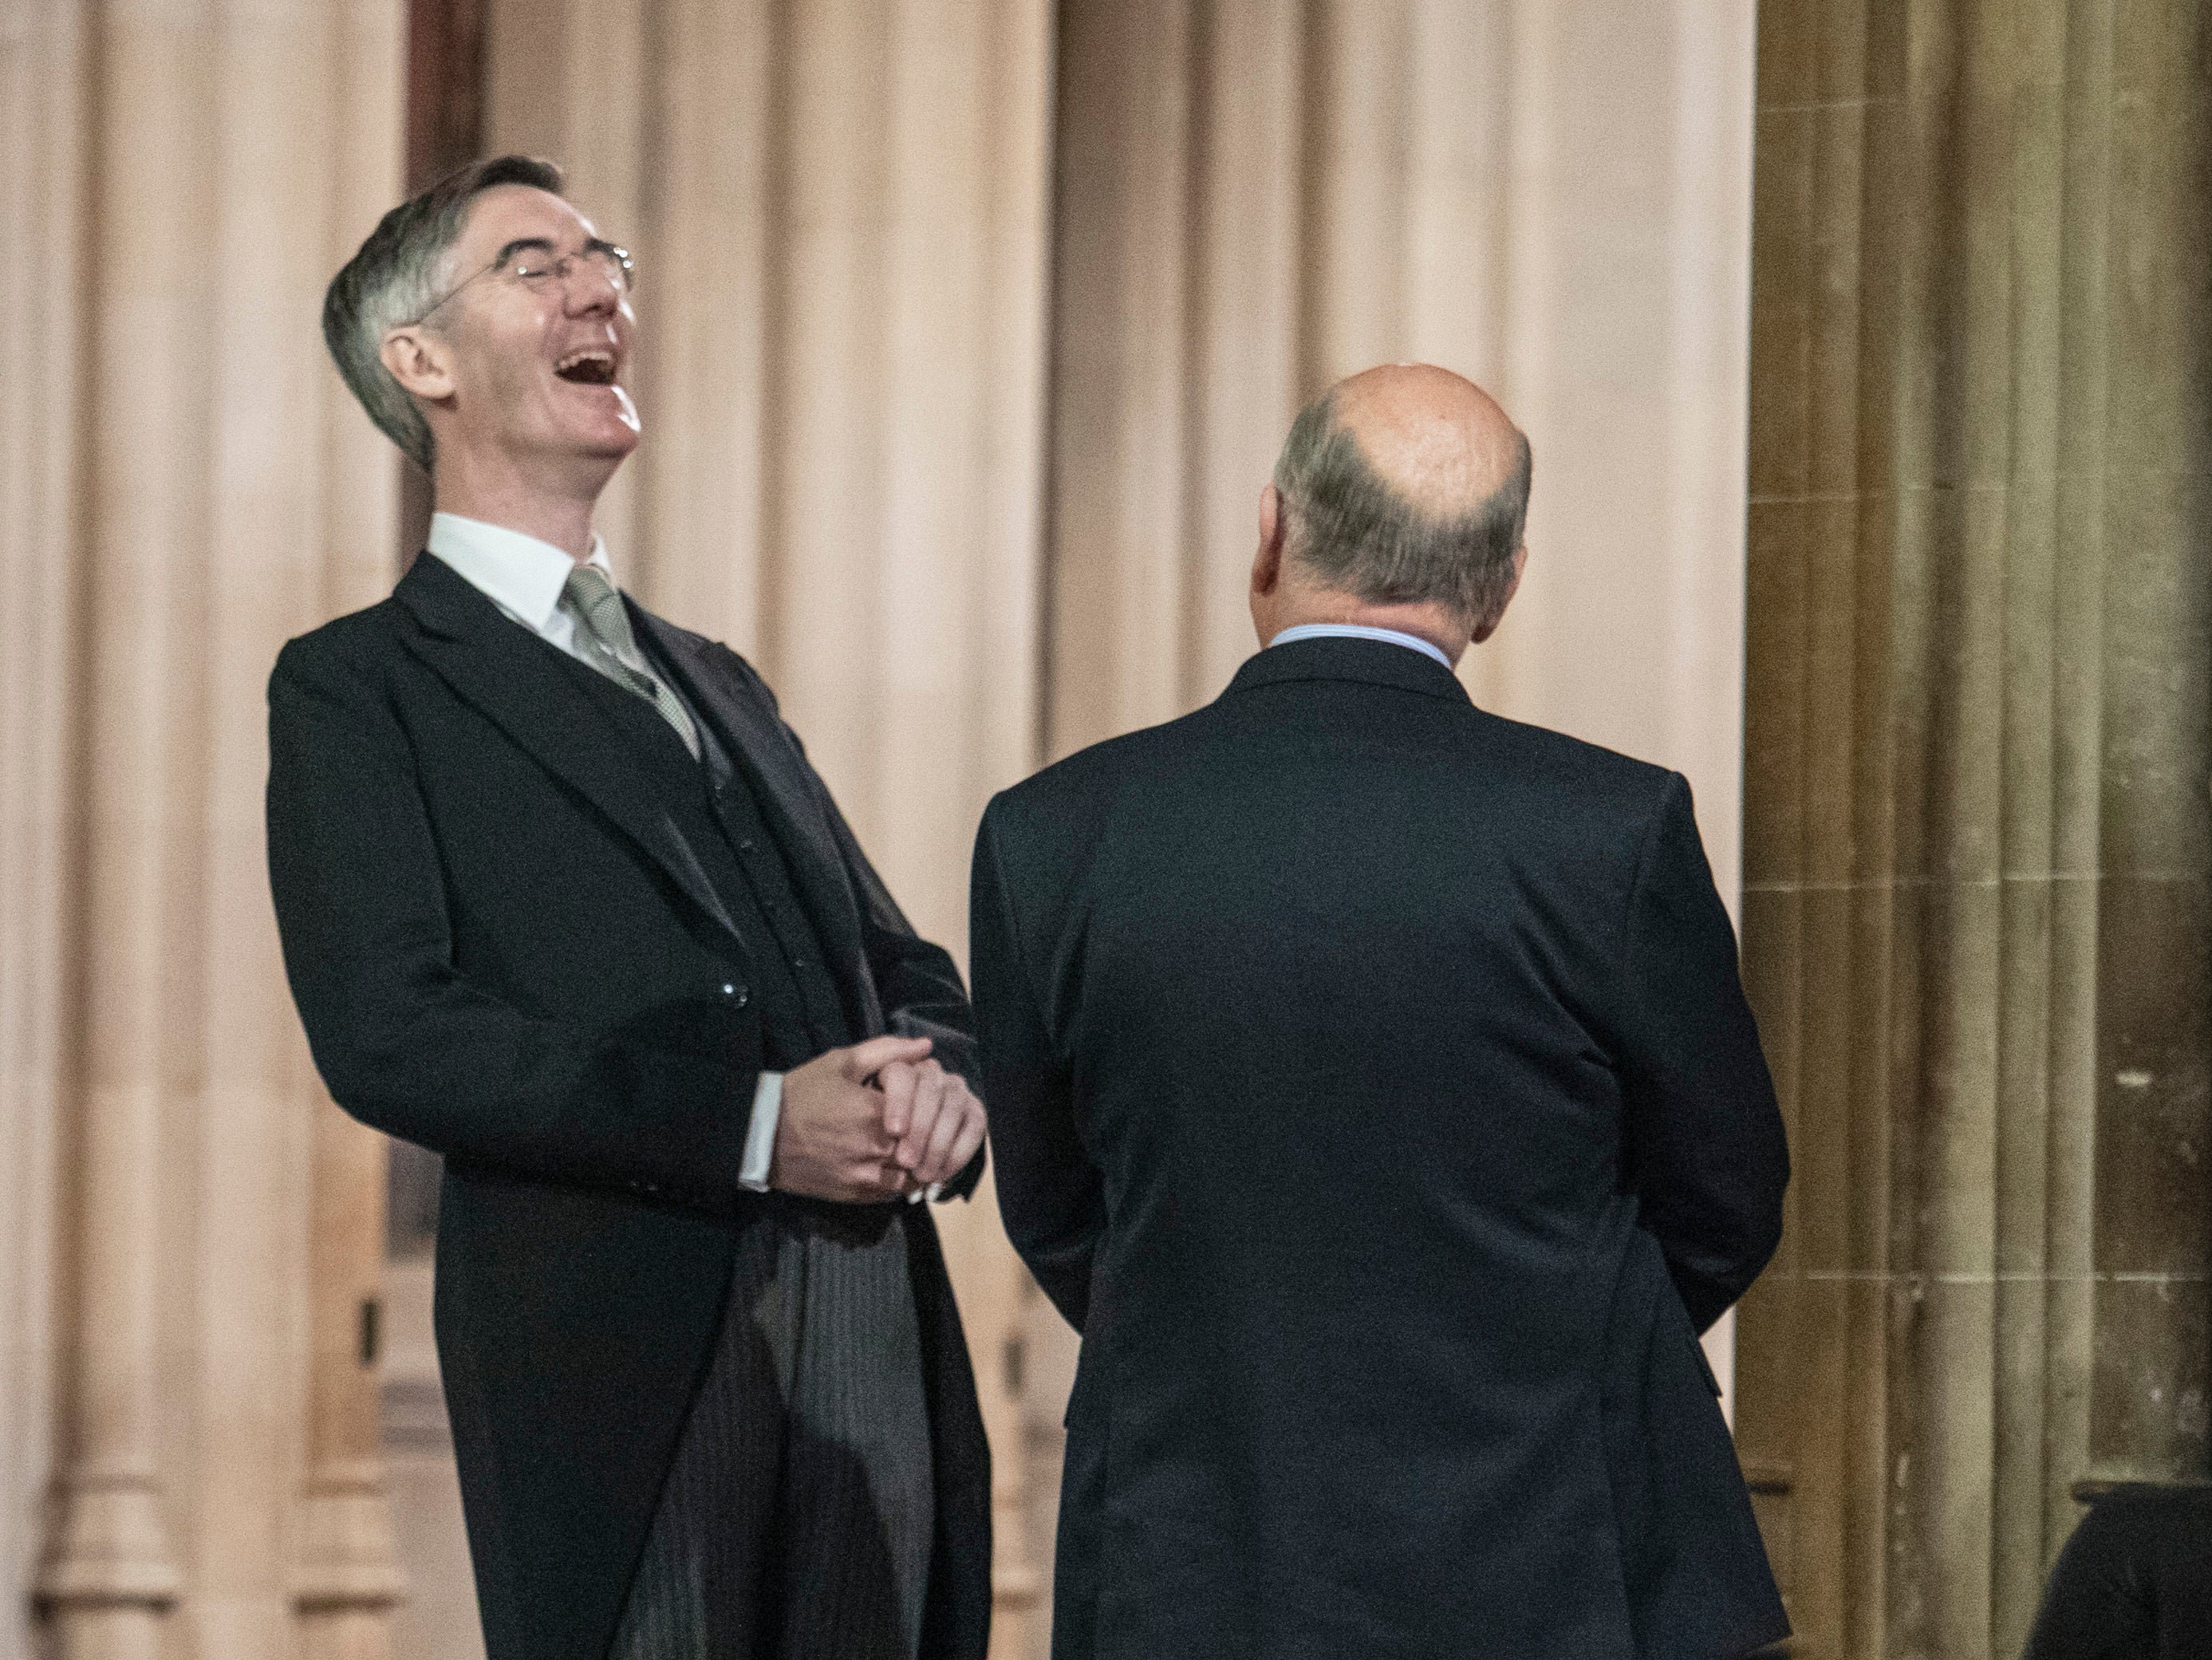 Jacob Rees-Mogg’s look has proved no impediment to getting elected